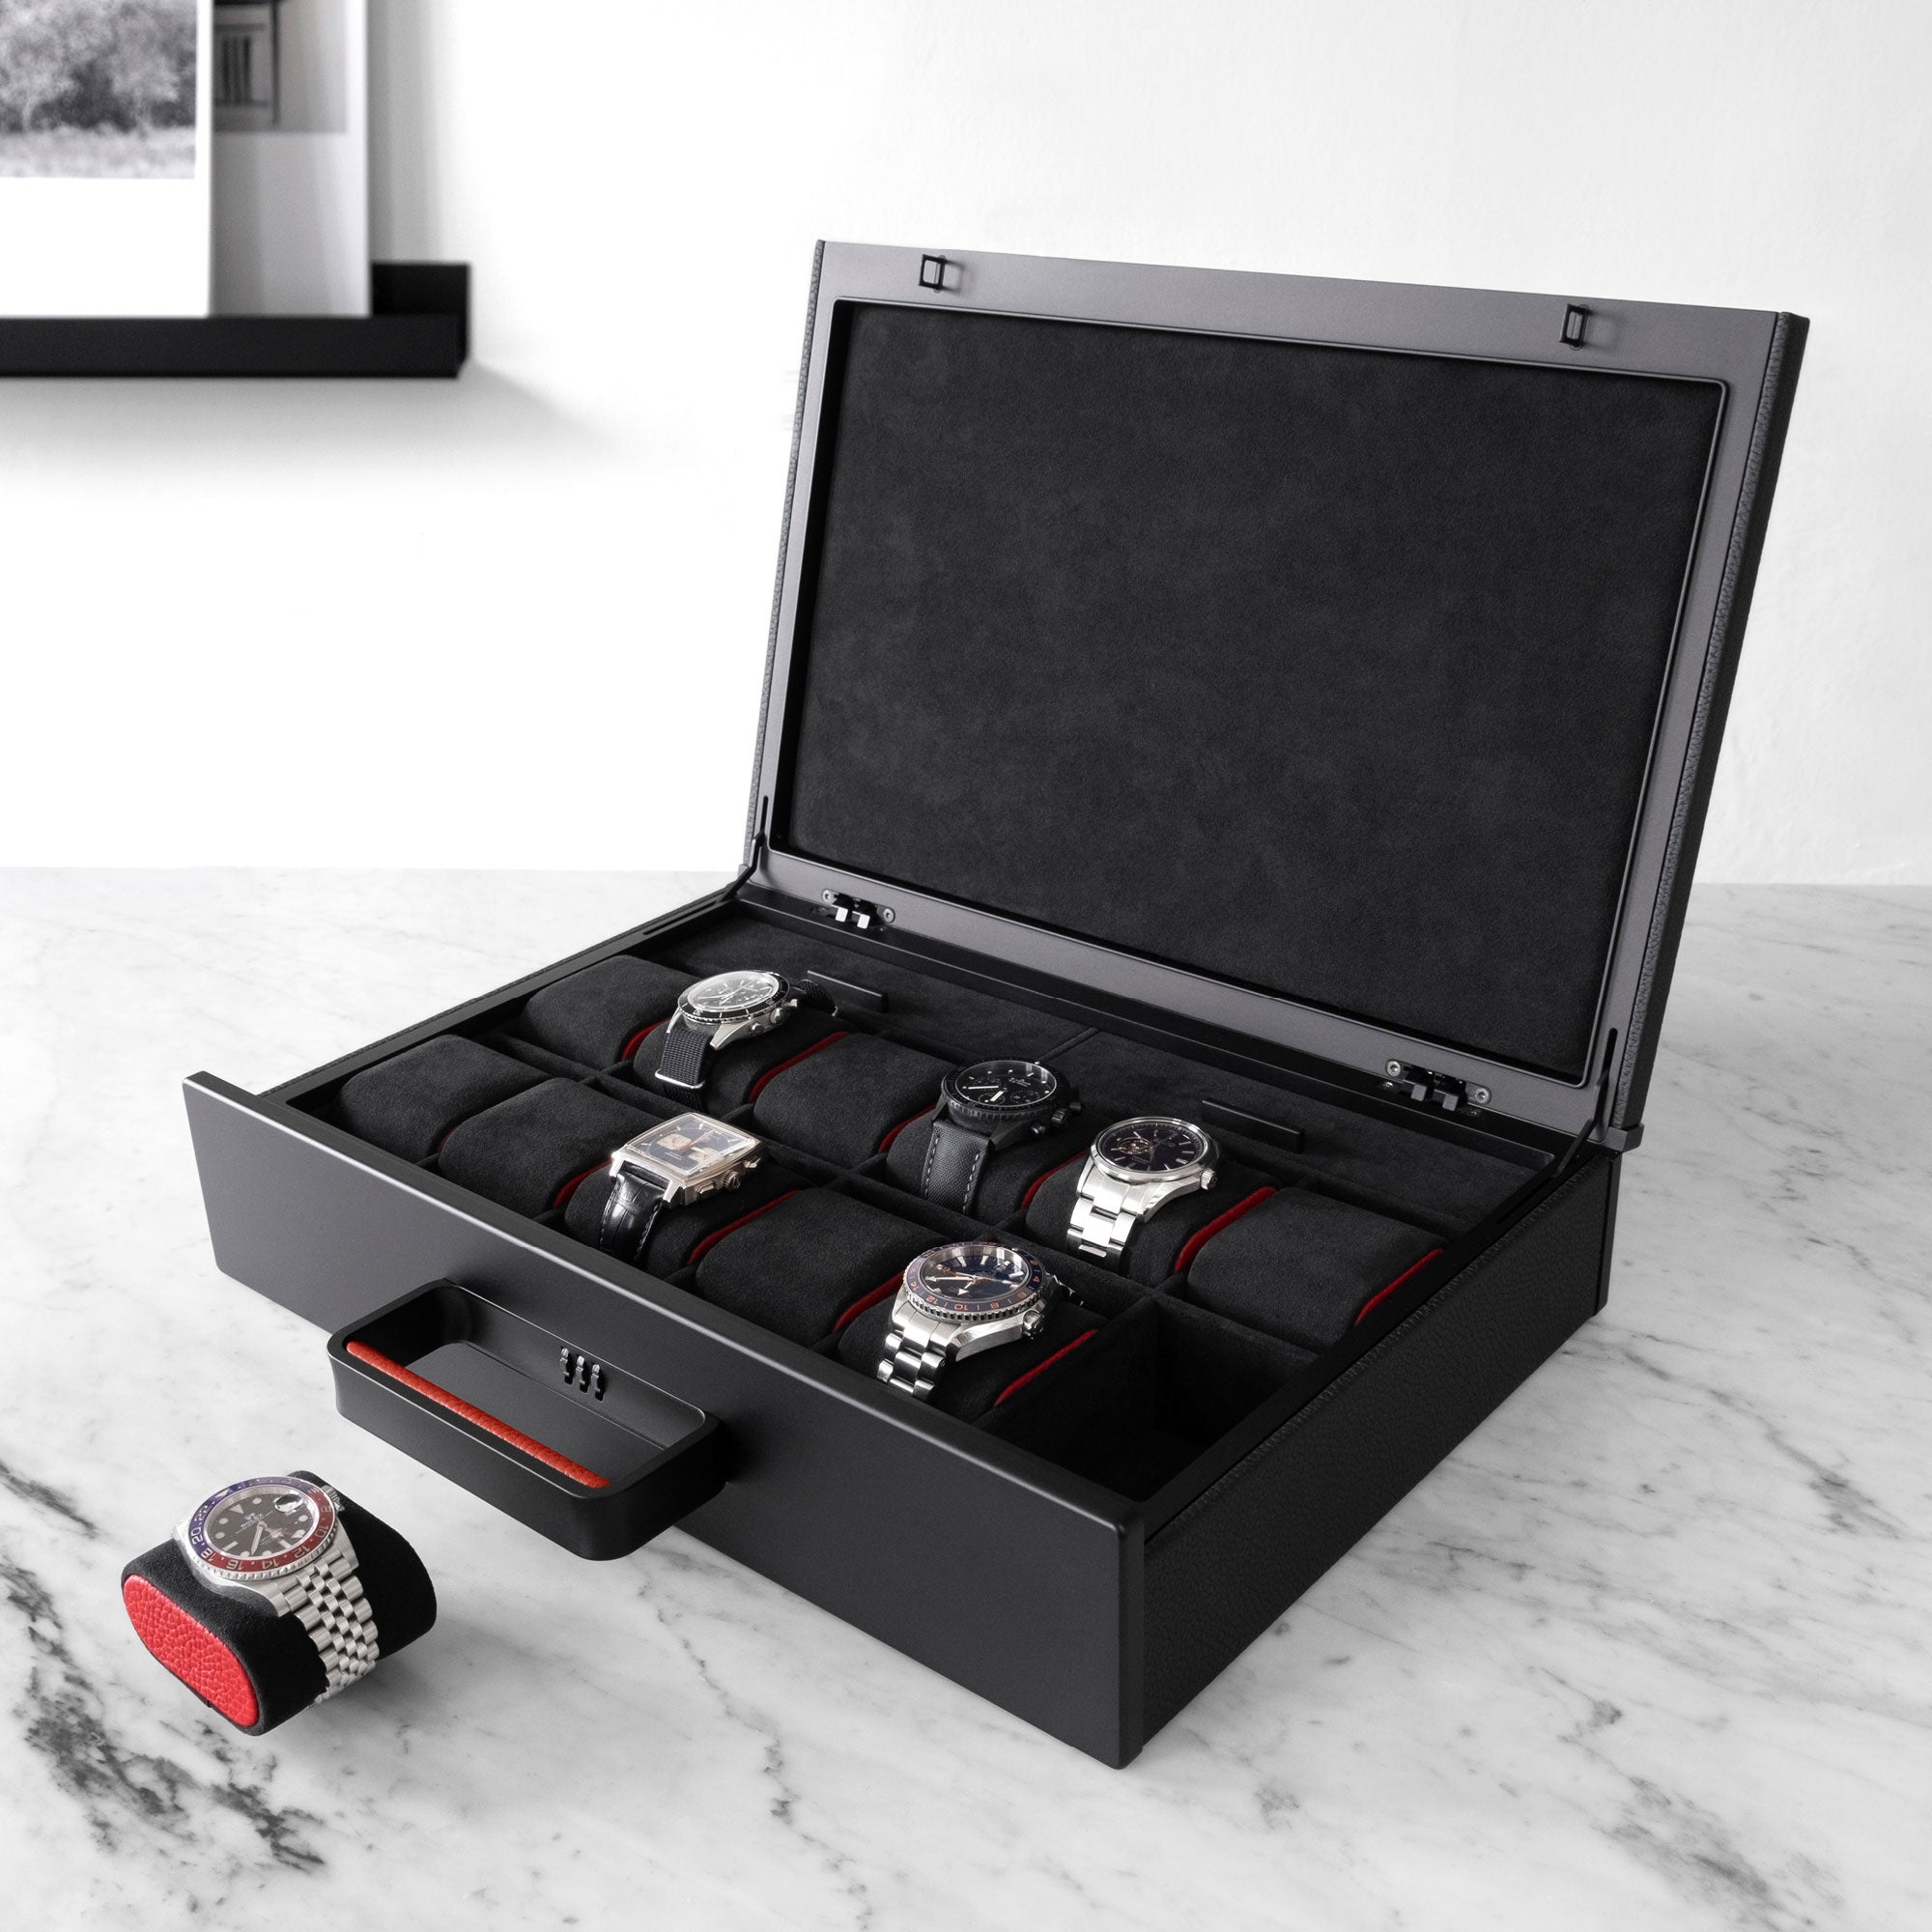 Designer Watch briefcase for 12 watches in black leather with contrasting red leather accents, carbon fiber, black anodized aluminum and black Alcantara interior with luxury watches including Tag Heuer, Rolex, Blancpain and Omega